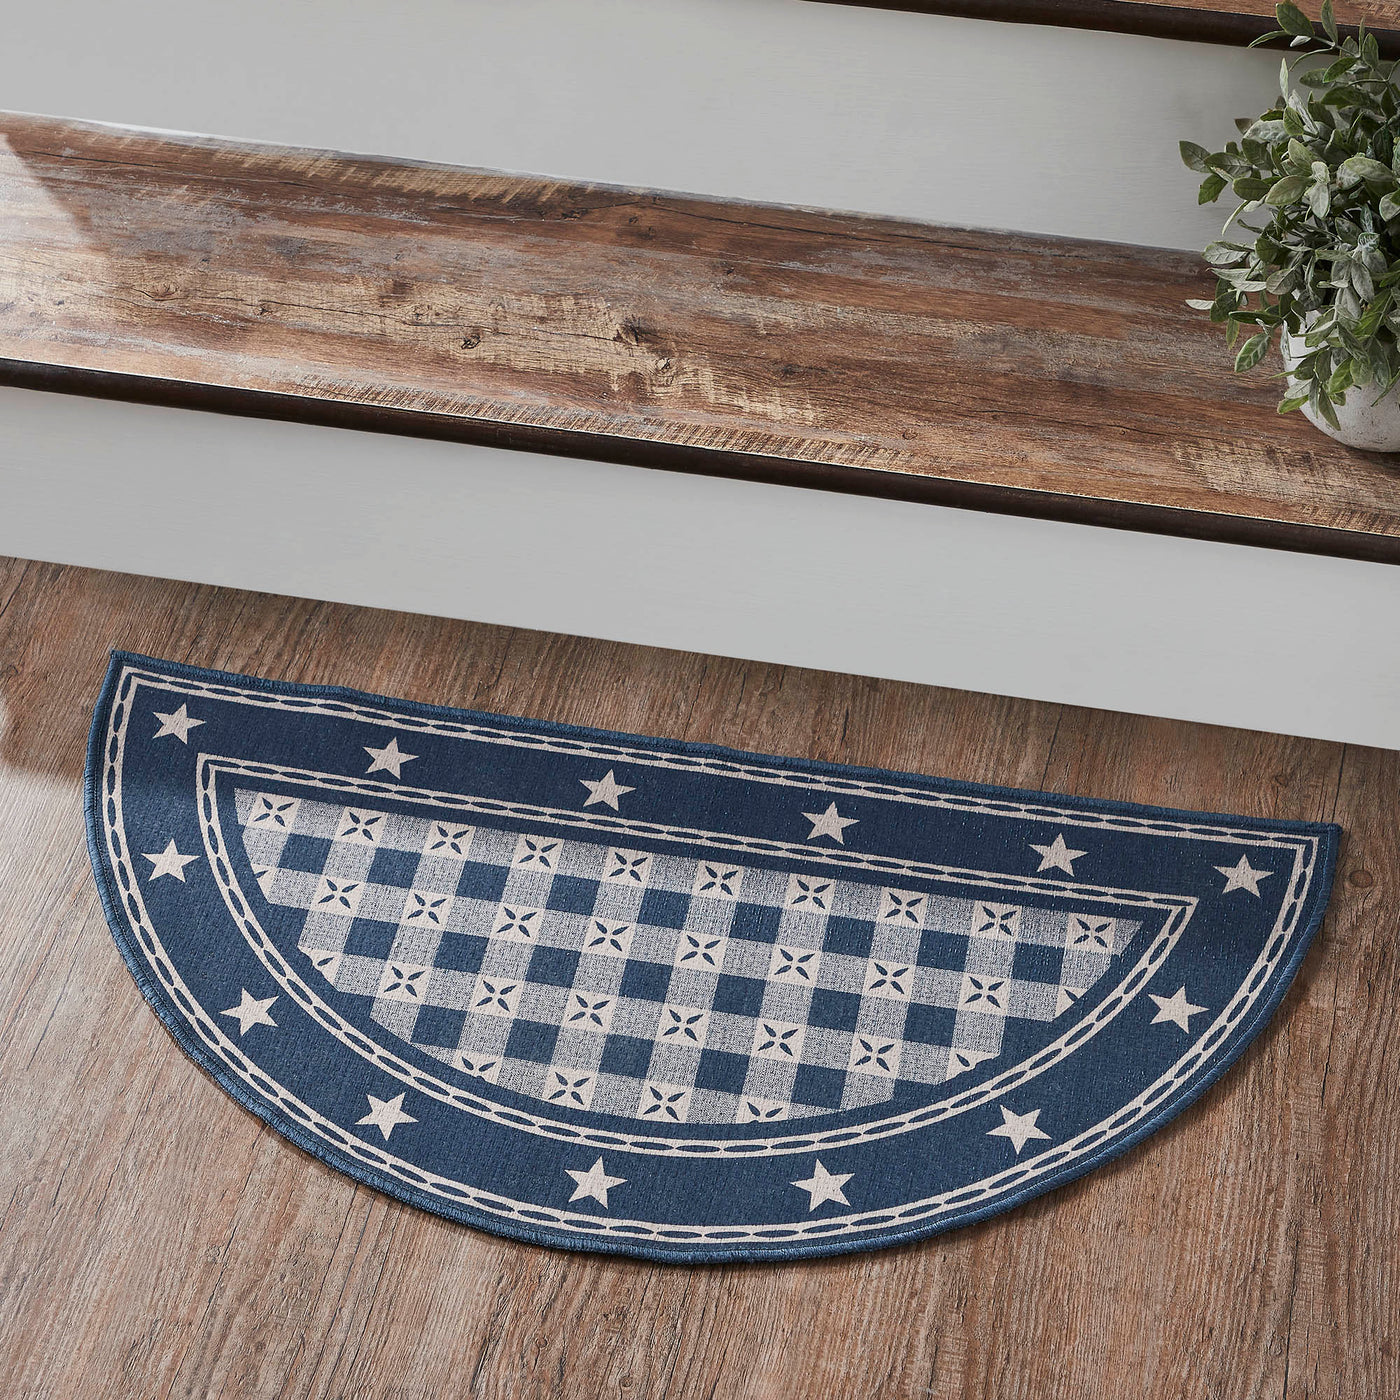 My Country Indoor/Outdoor Blue and Tan Rug Half Circle 16.5" x 33"